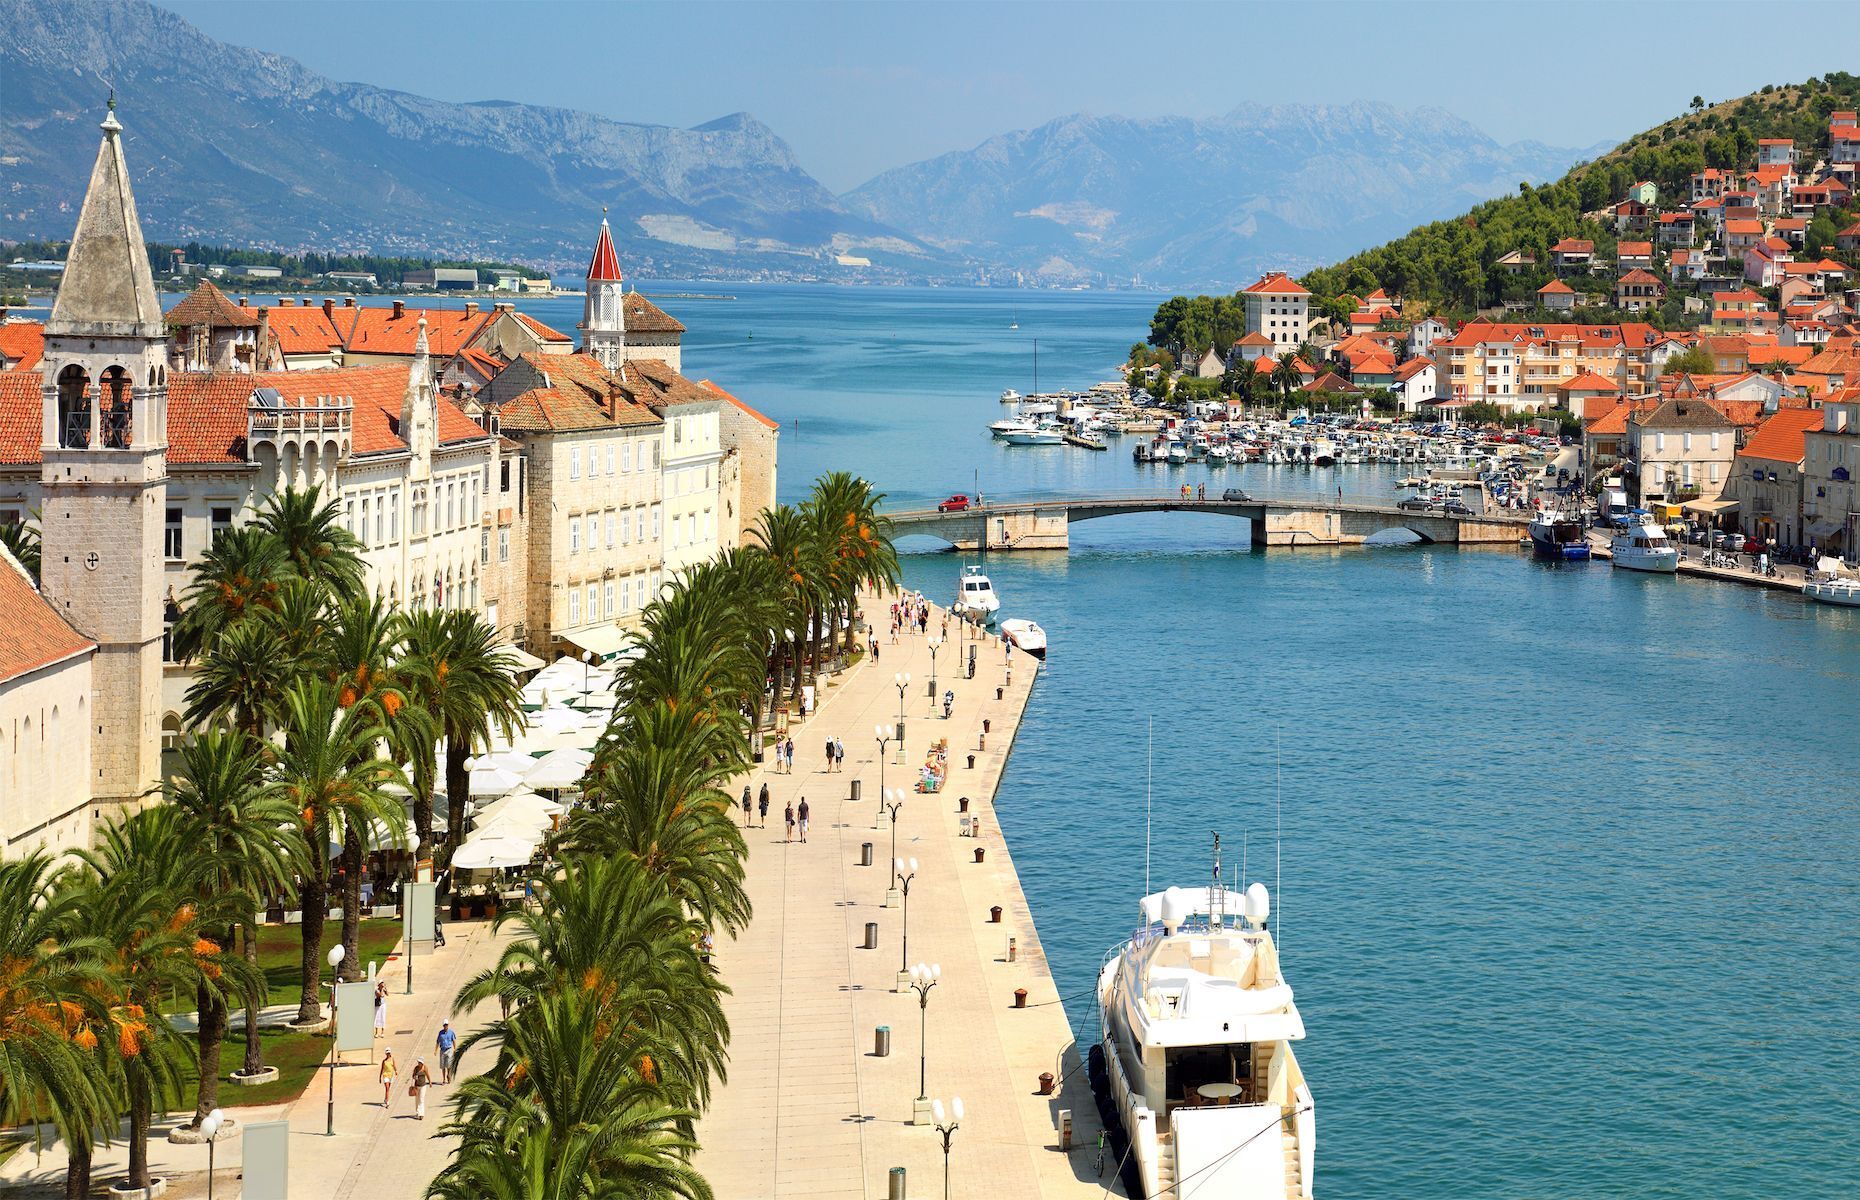 Less than 30 kilometres (18 miles) from Split, you’ll find the sublime town of <a href="https://www.earthtrekkers.com/beautiful-town-trogir-croatia-photos/" rel="noreferrer noopener">Trogir,</a> a treasure of the Dalmatian coast and one of the region’s most beautiful places to visit. In addition to seeing its magnificent medieval districts, a UNESCO World Heritage Site, tour Venetian palaces and the 13th-century St. Lawrence Cathedral. Packed with excellent seaside restaurants offering the very best in traditional Dalmatian cuisine, Trogir is also the perfect foodie destination.